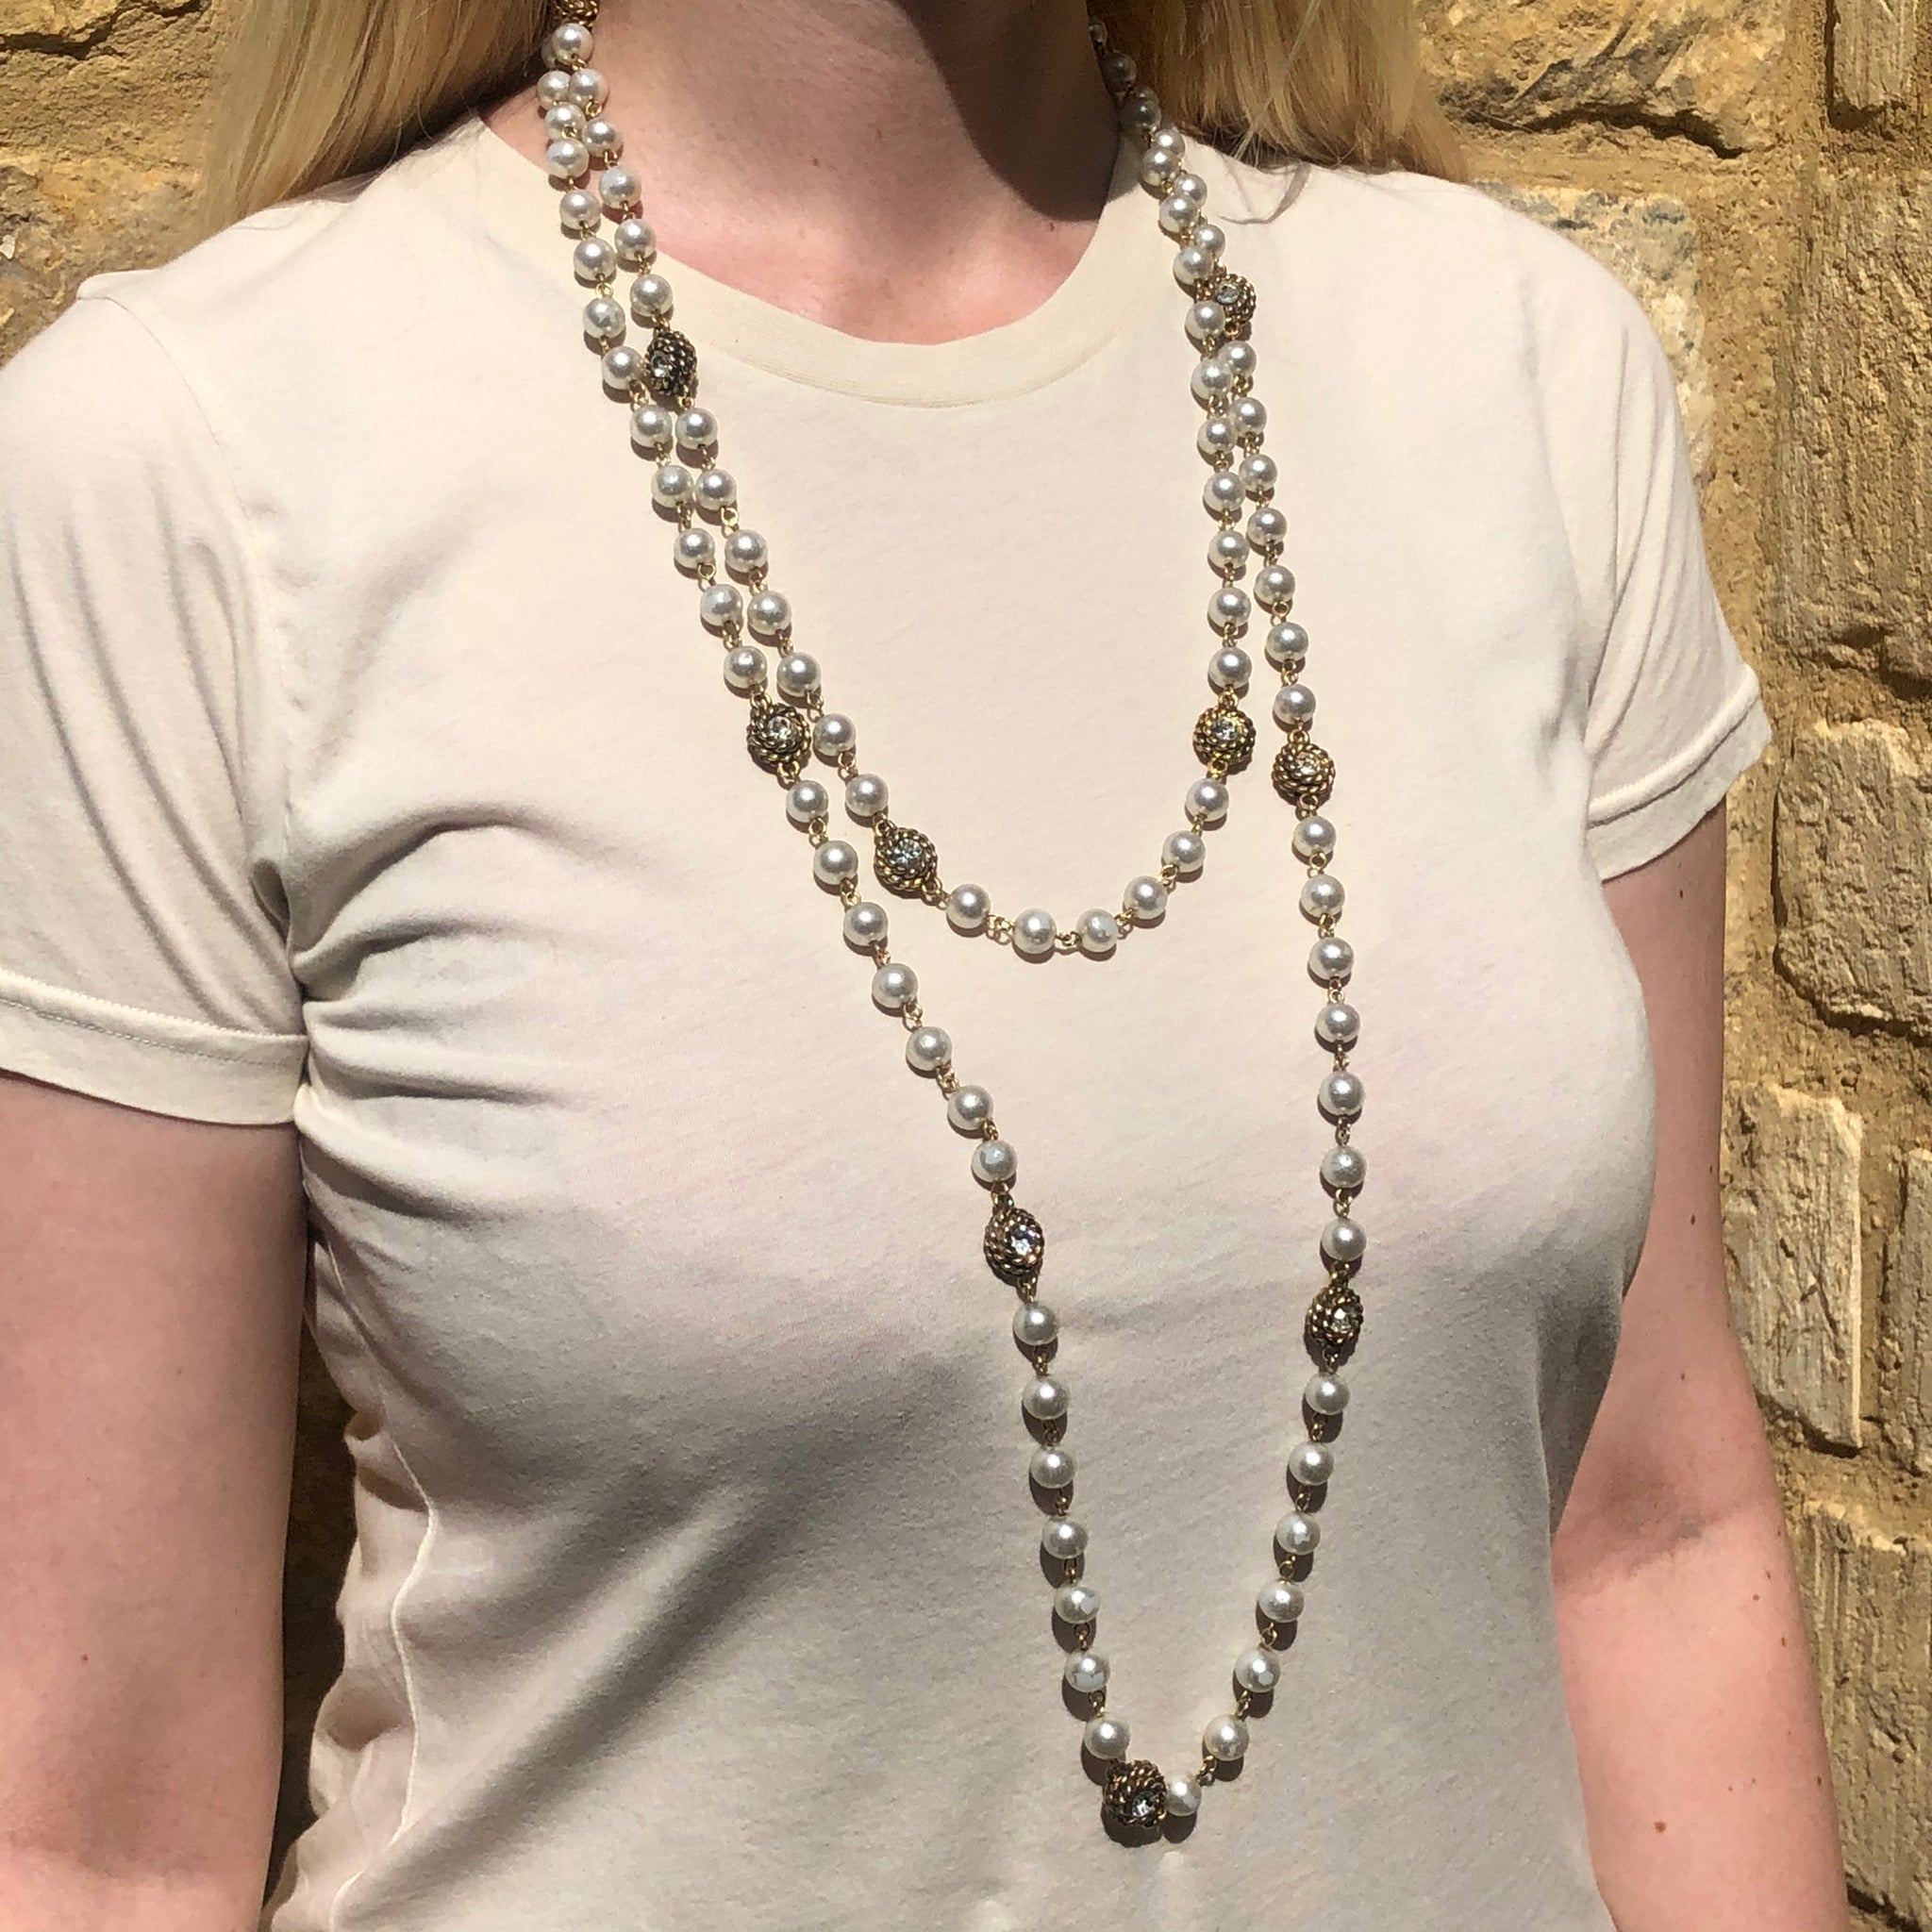 Timeless Classic Chanel Pearl 2 CC Crystal Necklace